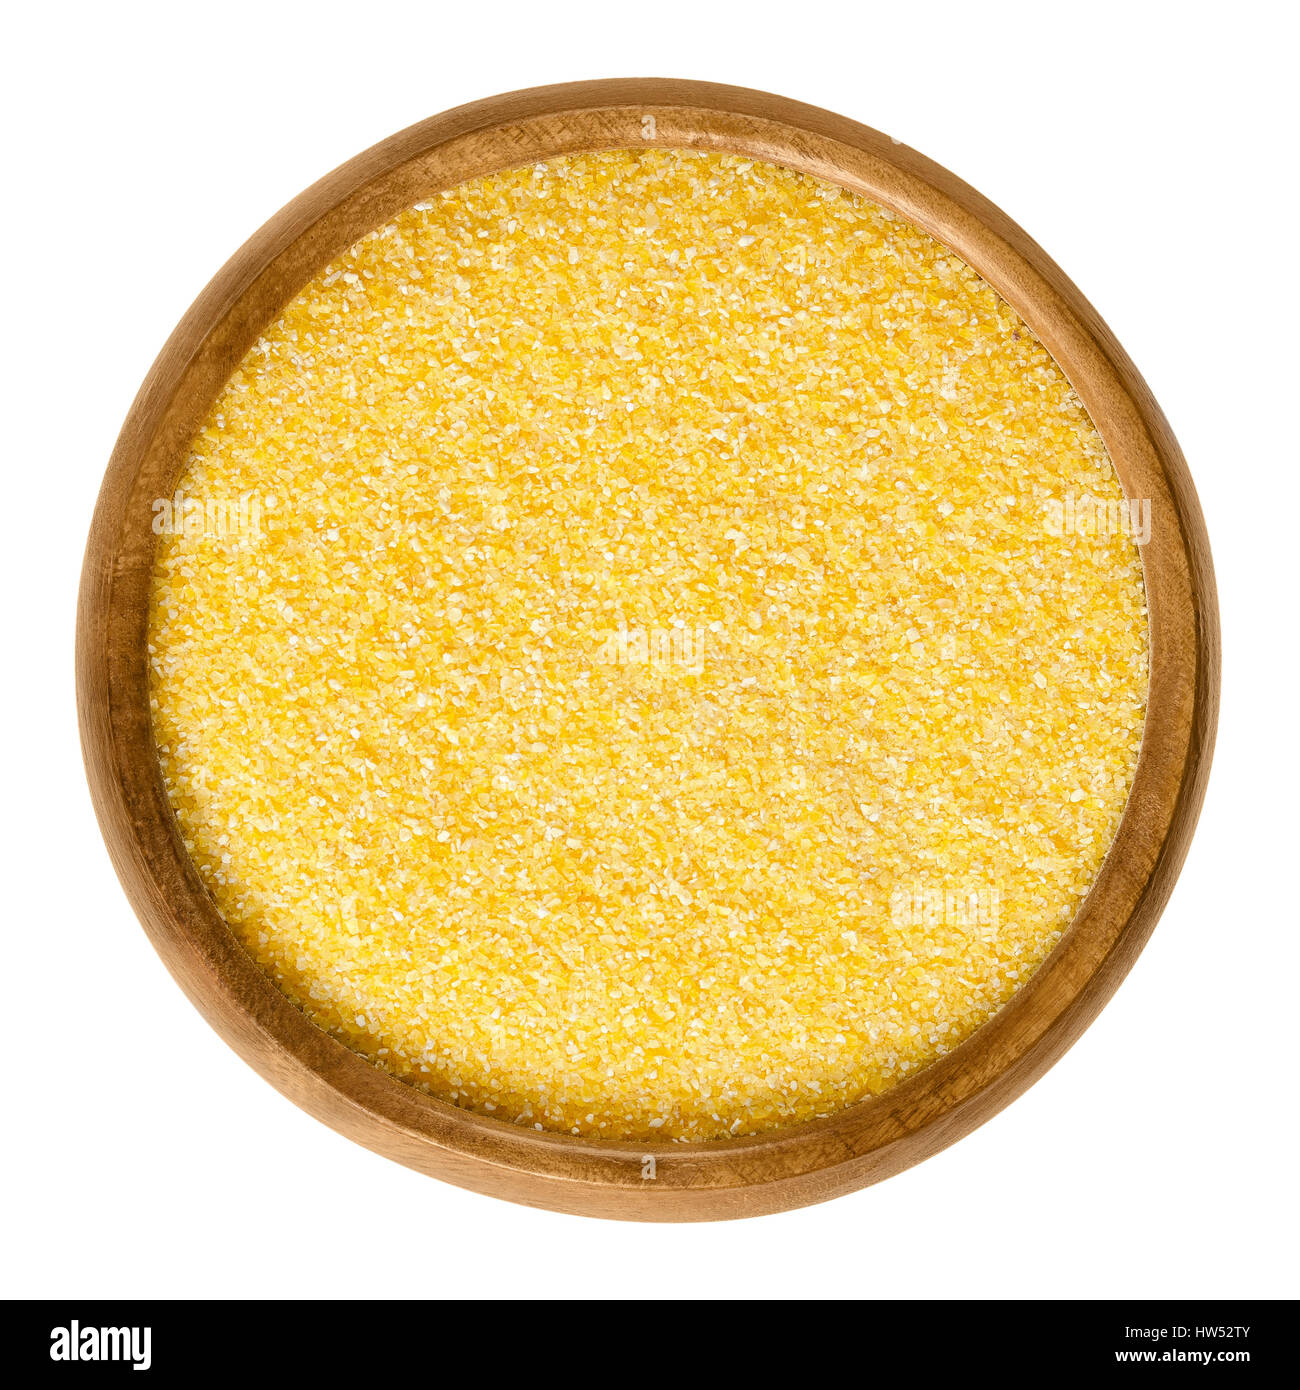 Cornmeal in wooden bowl. Raw uncooked meal, medium ground from dried maize. Common stable food. Boiled cornmeal is called polenta. Stock Photo